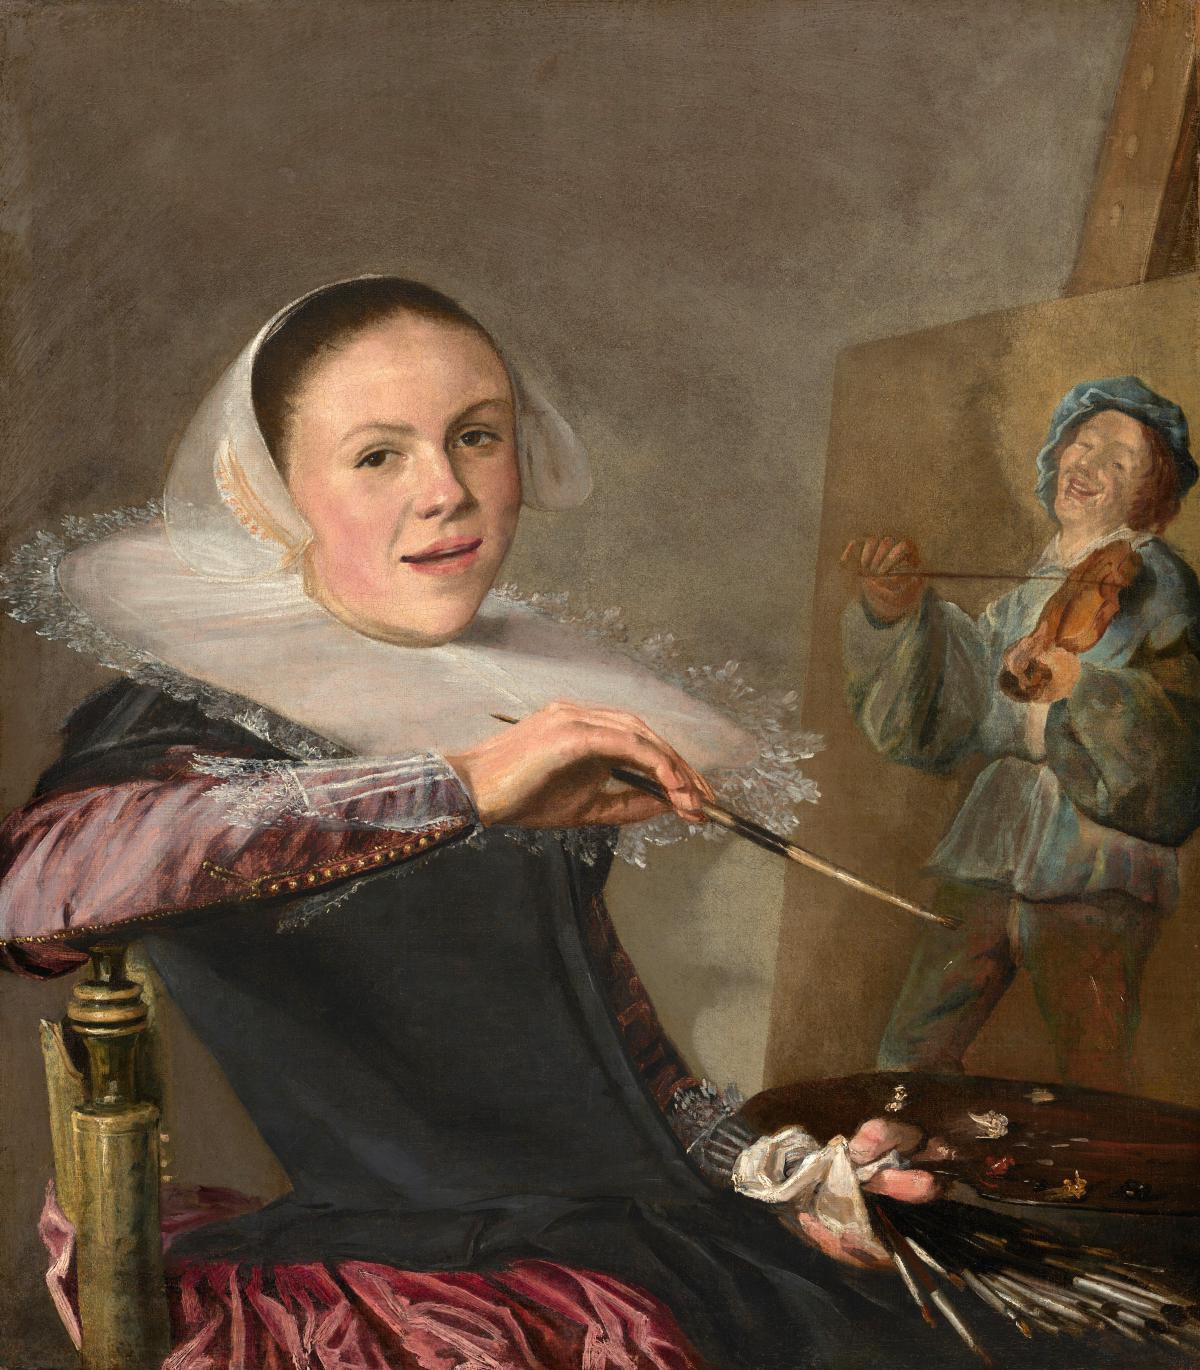 Woman artist sitting at her easel 